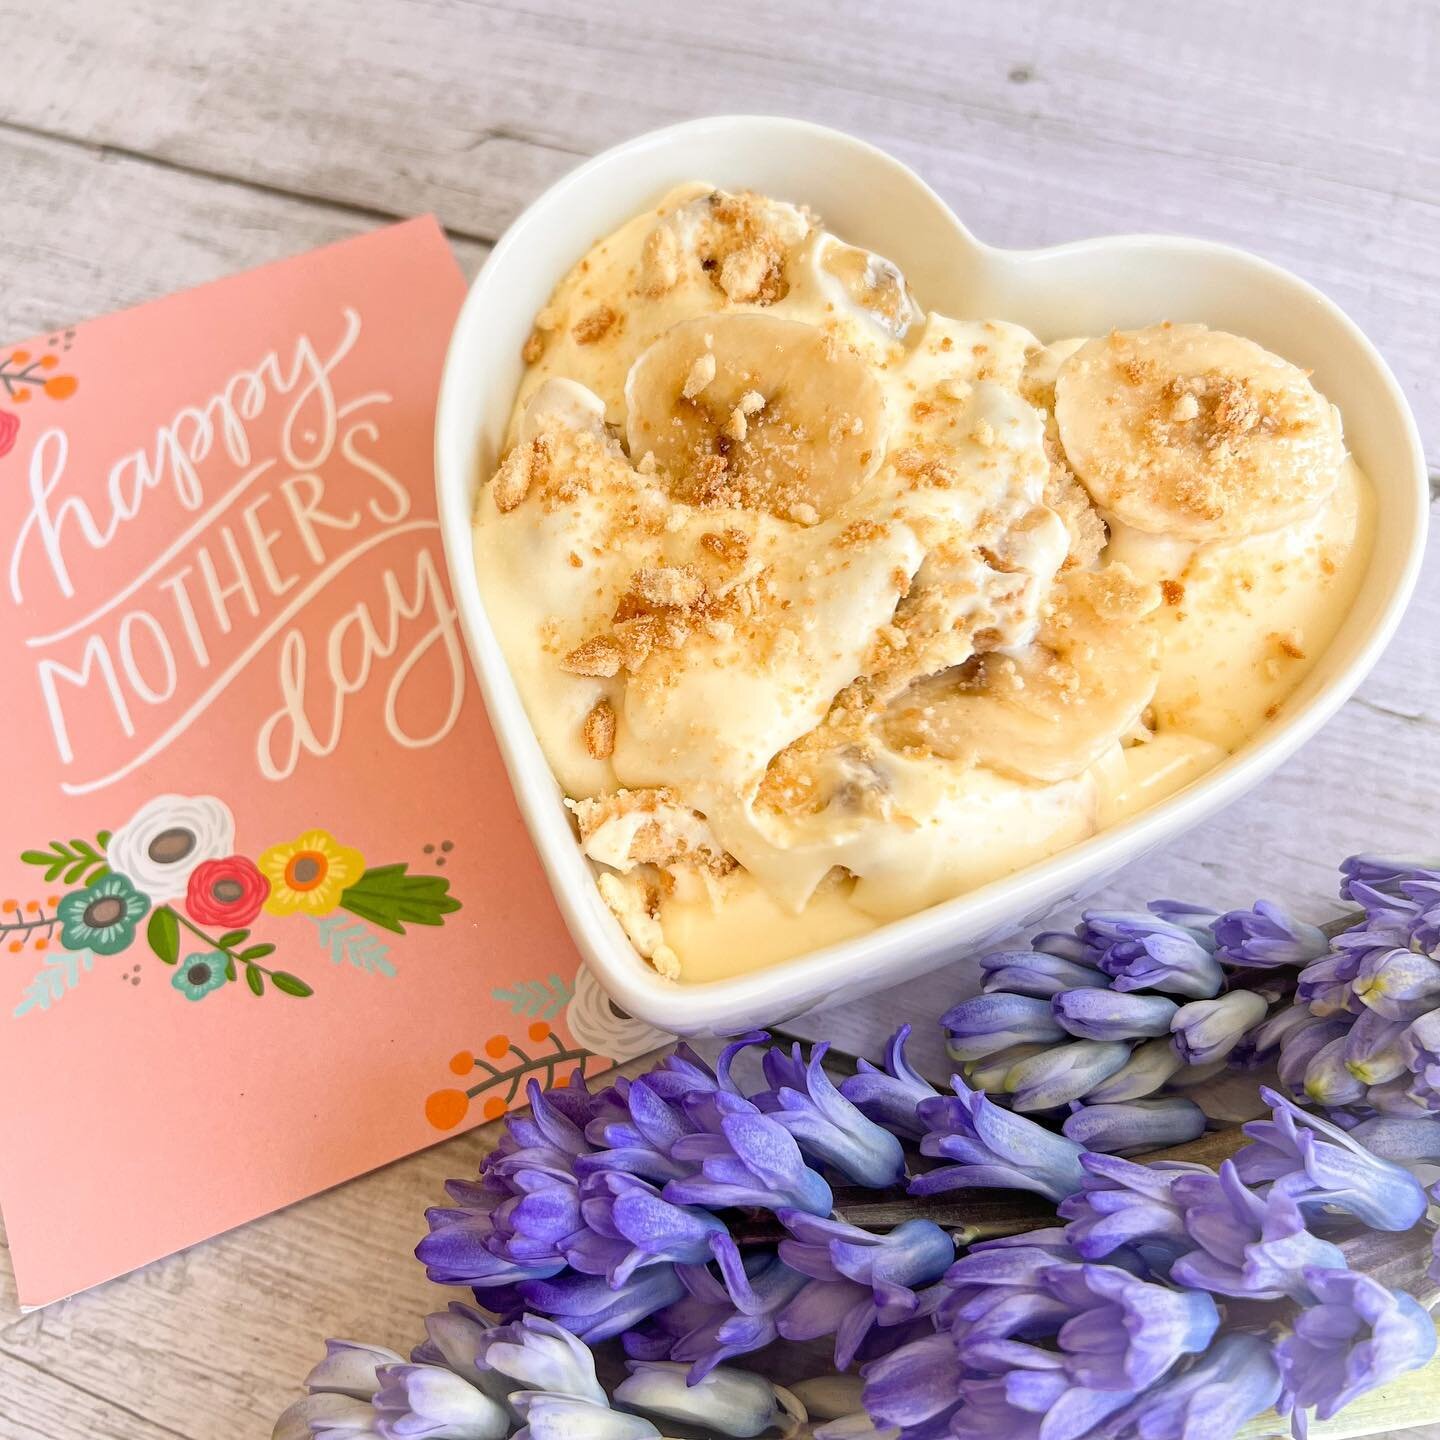 Happy Mother's Day!!💐&nbsp;Today, don't forget to get 50% OFF on our famous Banana Pudding 🍌 for an order above 30$ through our website 👉 gastroboteats.com!😋 

Use the code: LOVEYOUMOM ❤️

Offer is valid today, and can only be used once.
.
.
.
.
